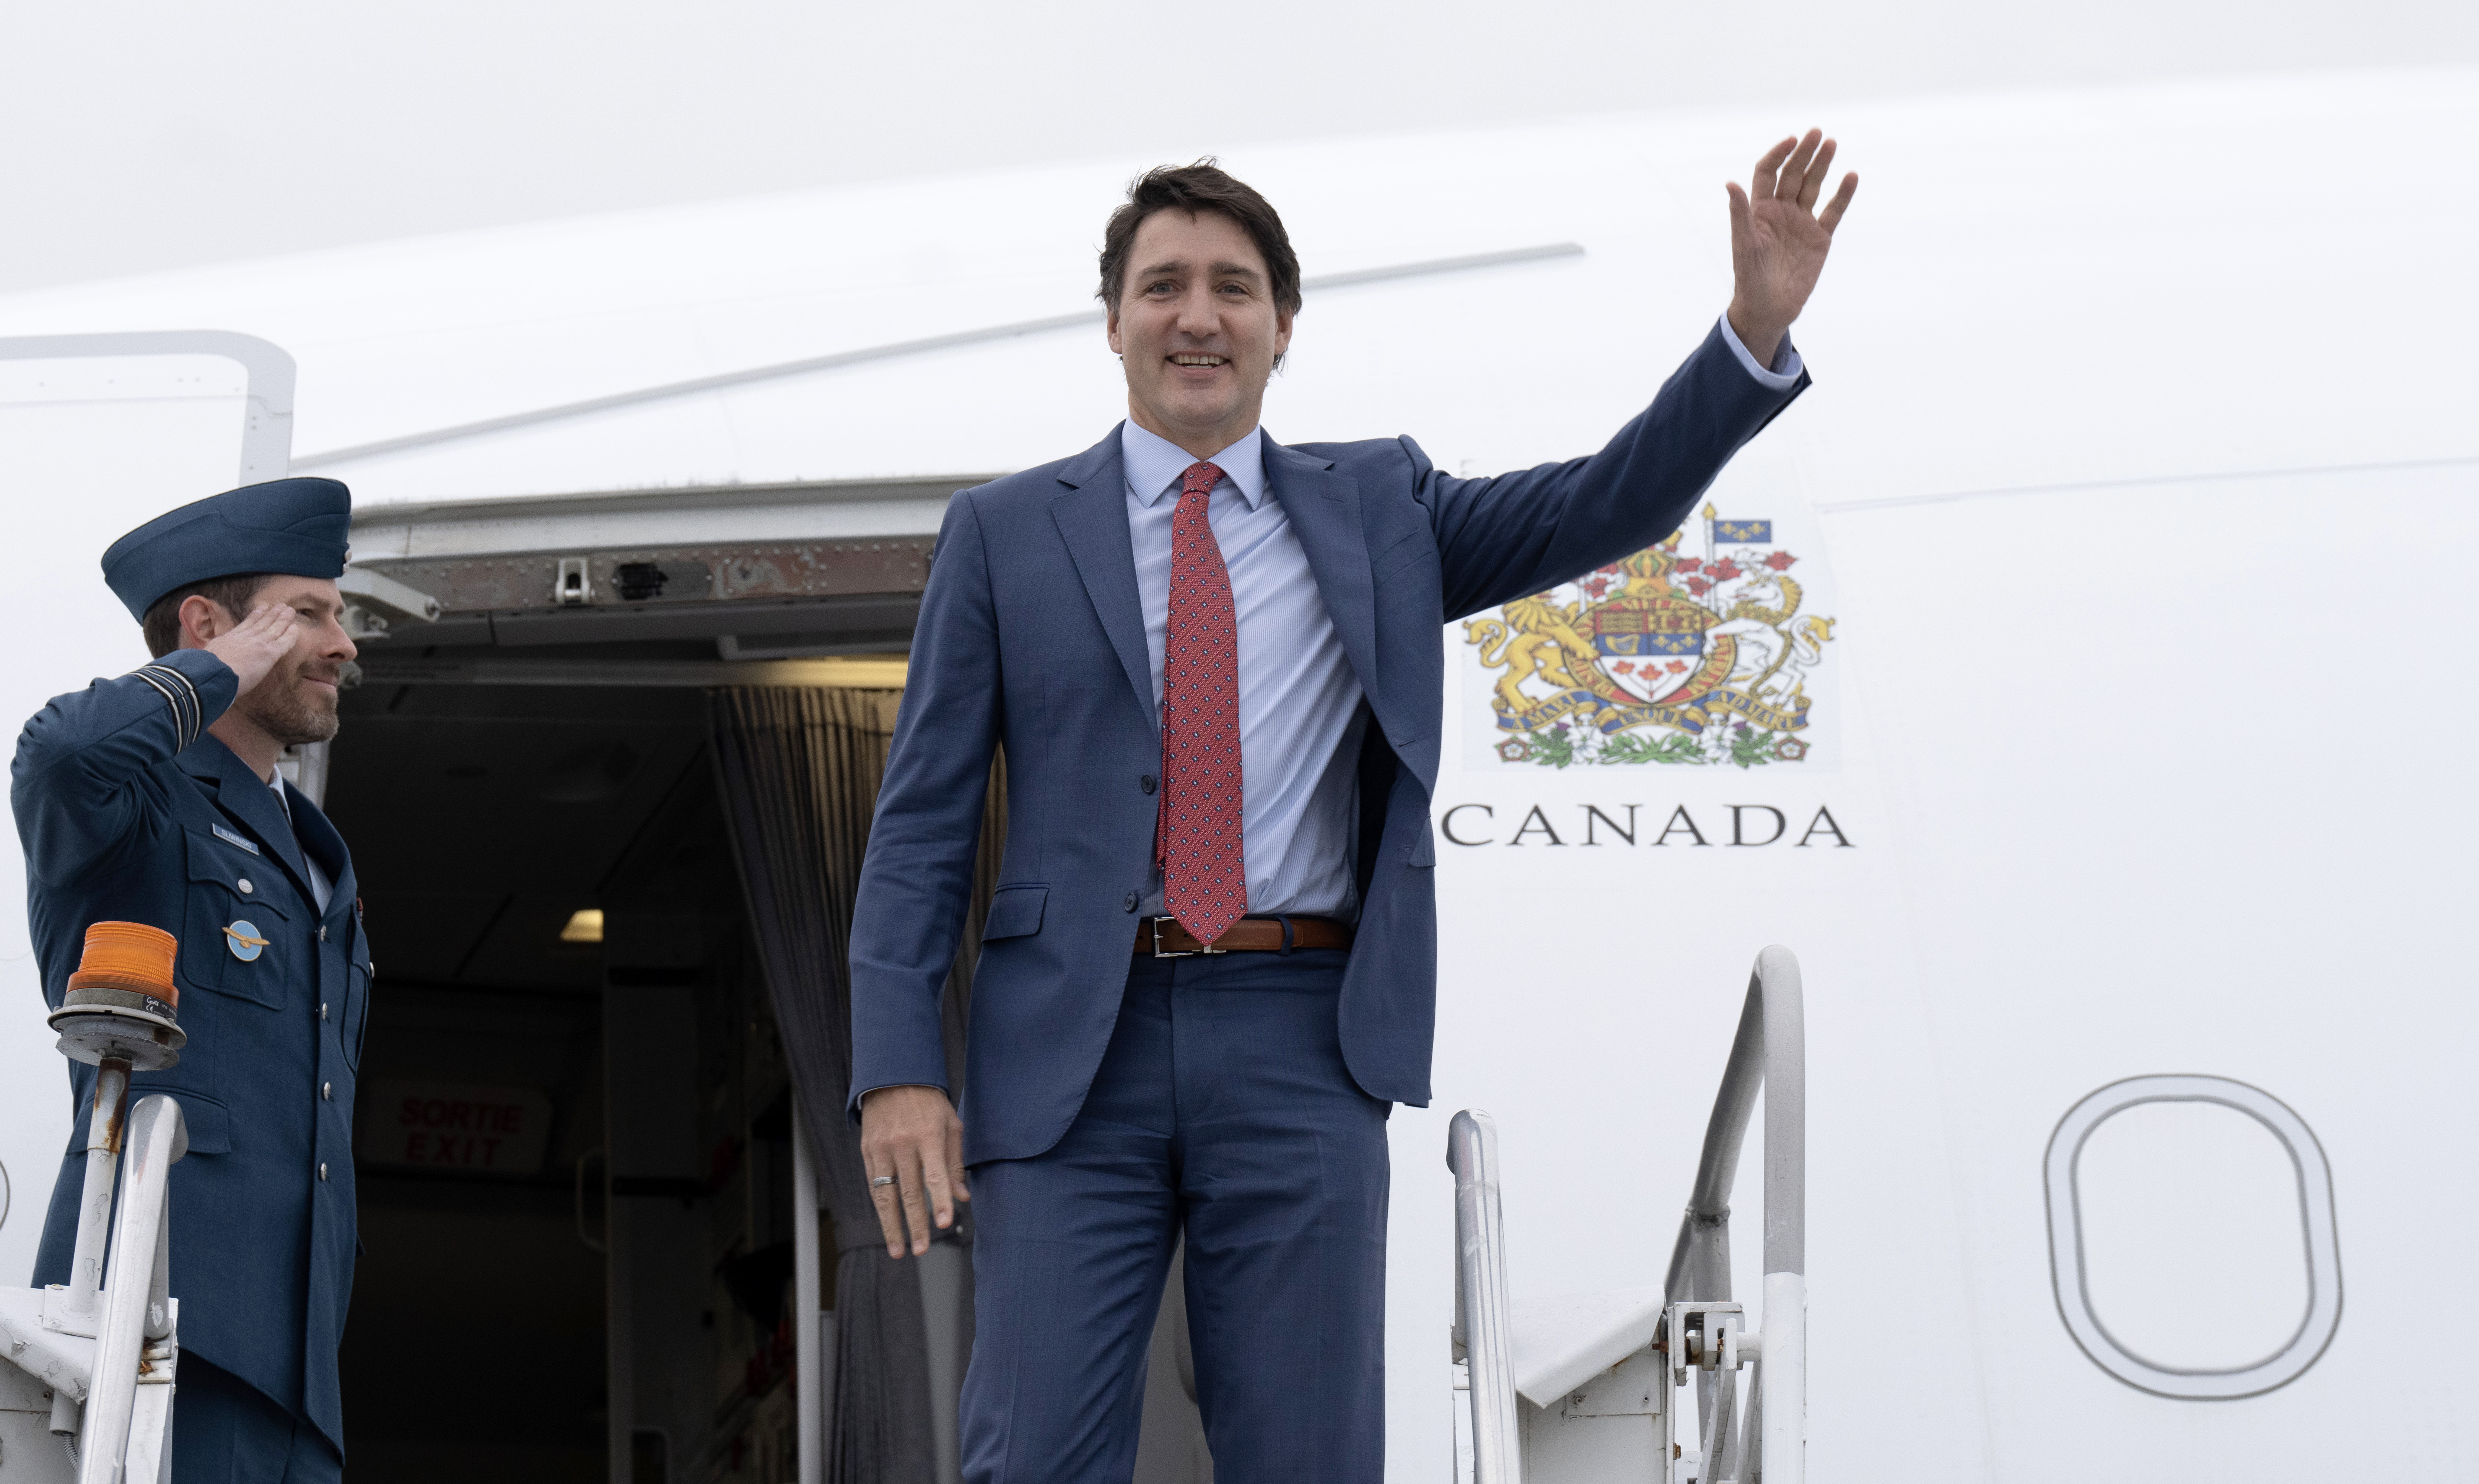 PM’s plane broke down in Jamaica during family vacation, requiring 2nd aircraft